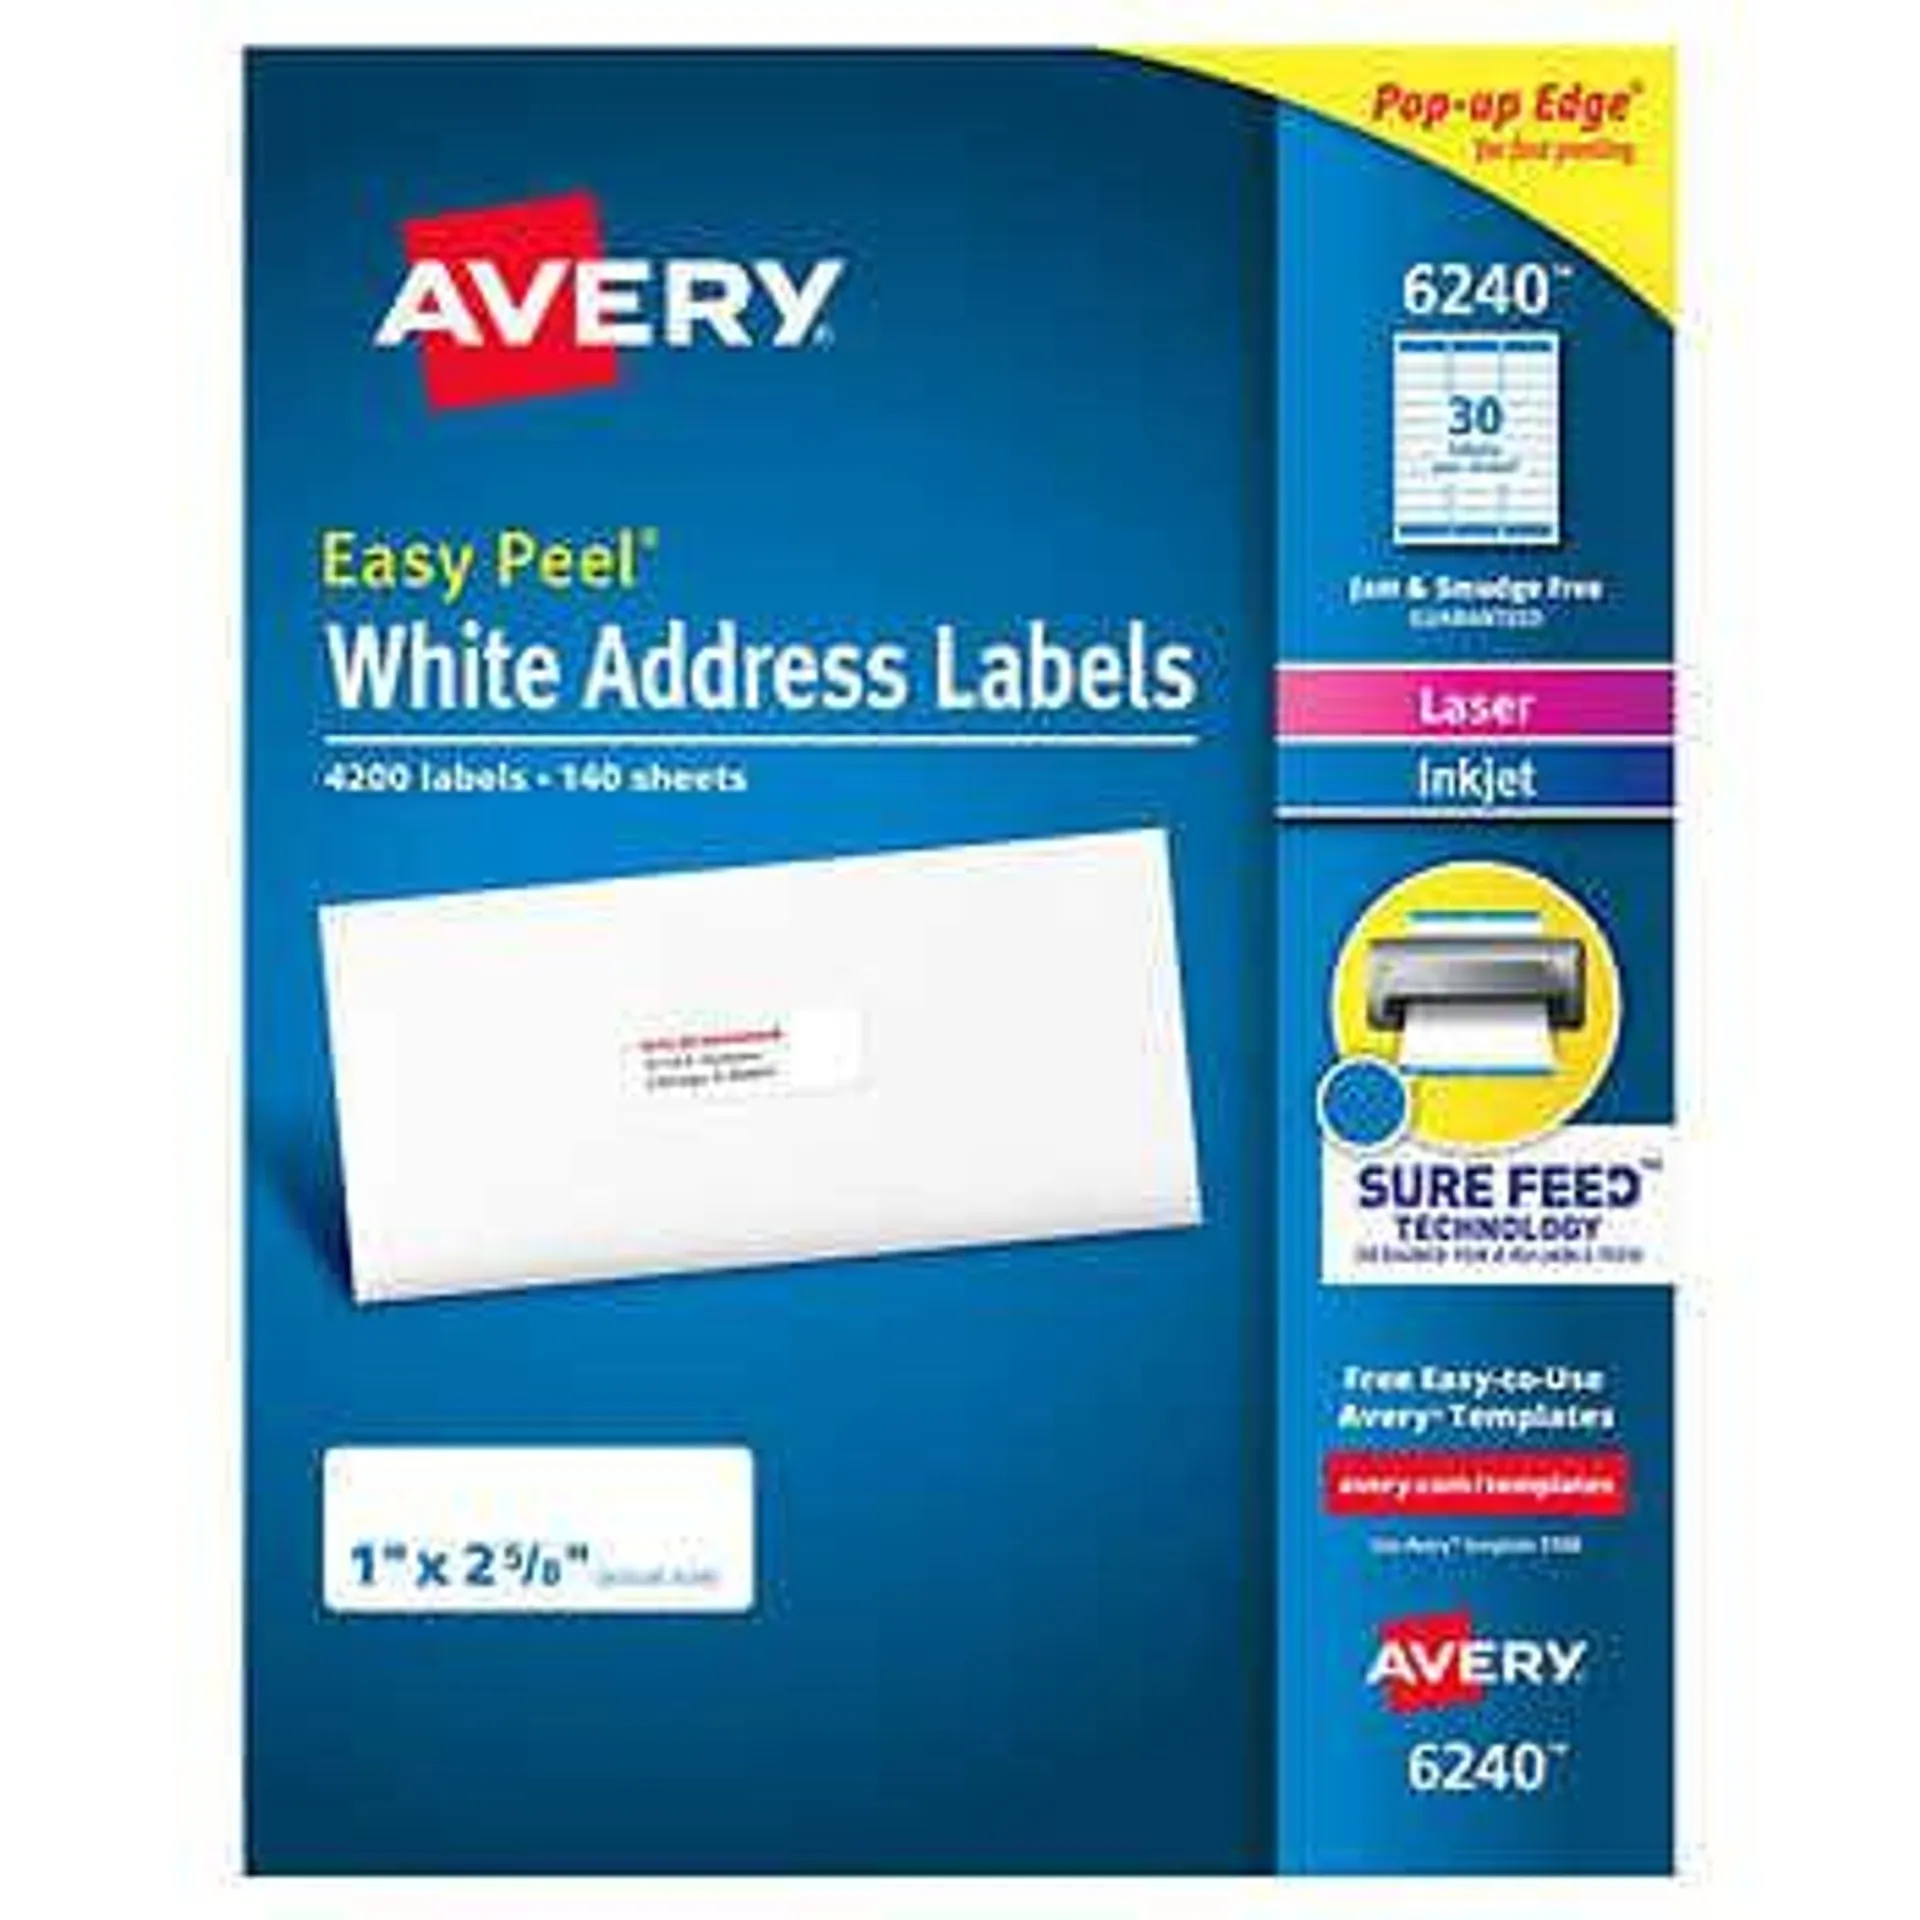 Avery Easy Peel Address Labels, 4200-count